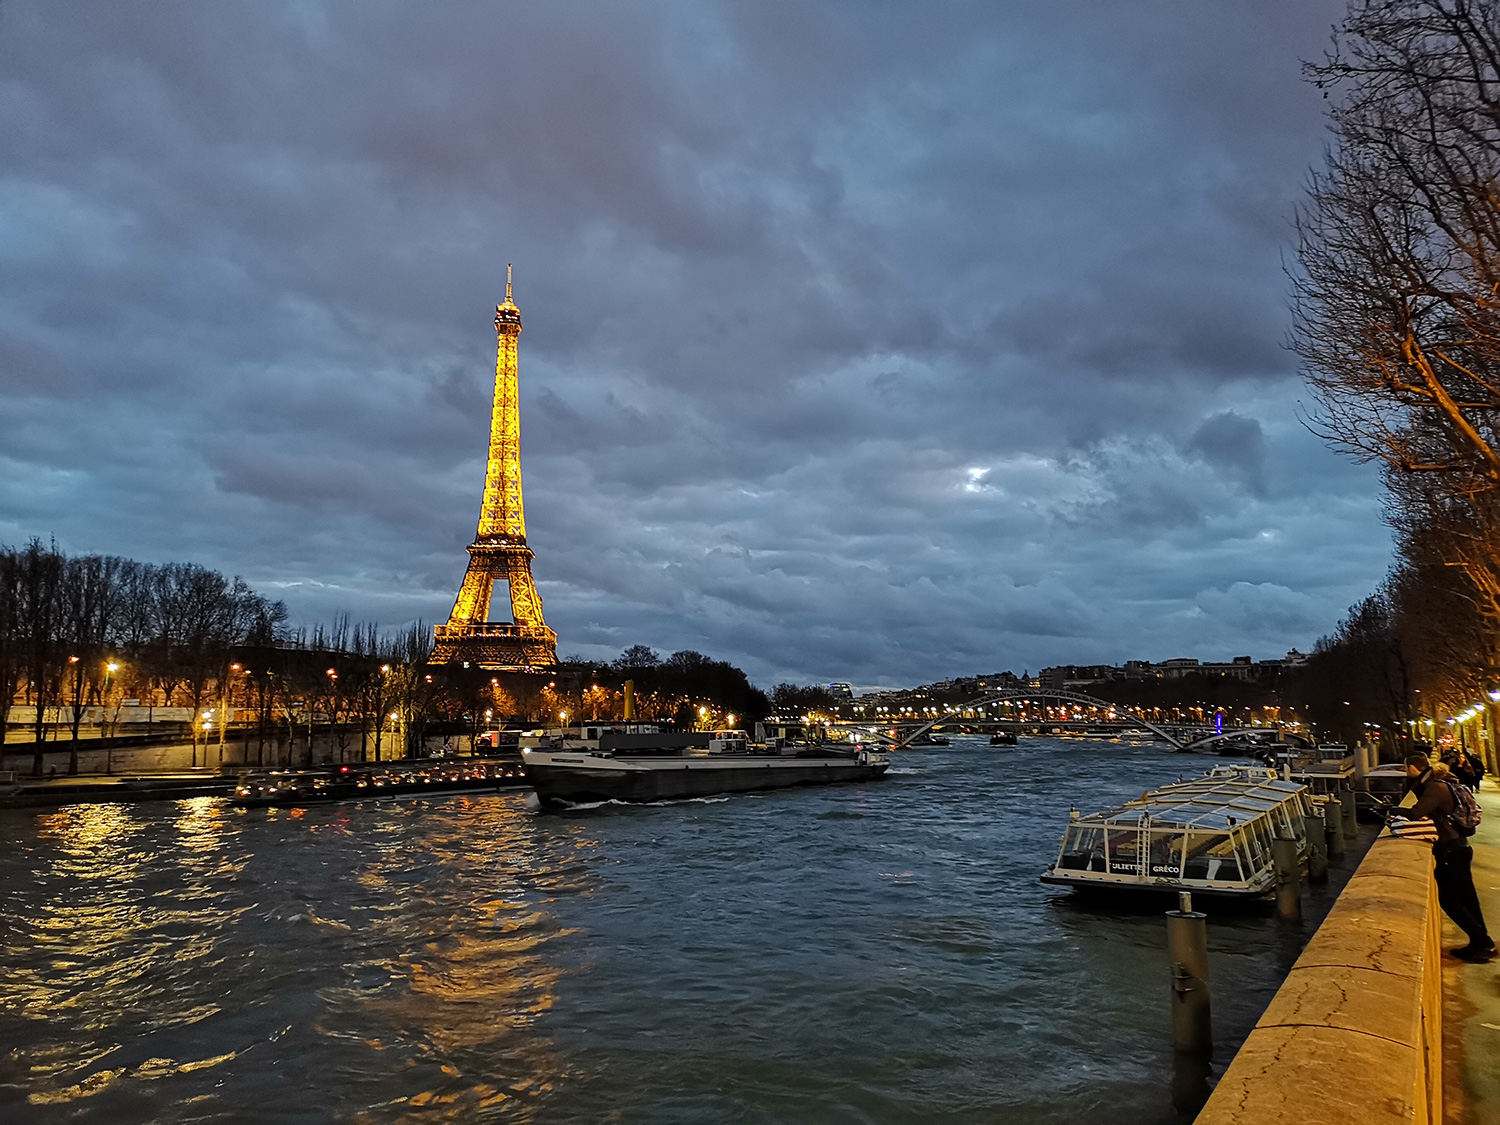 huawei p20 pro review sample photo eiffel tower